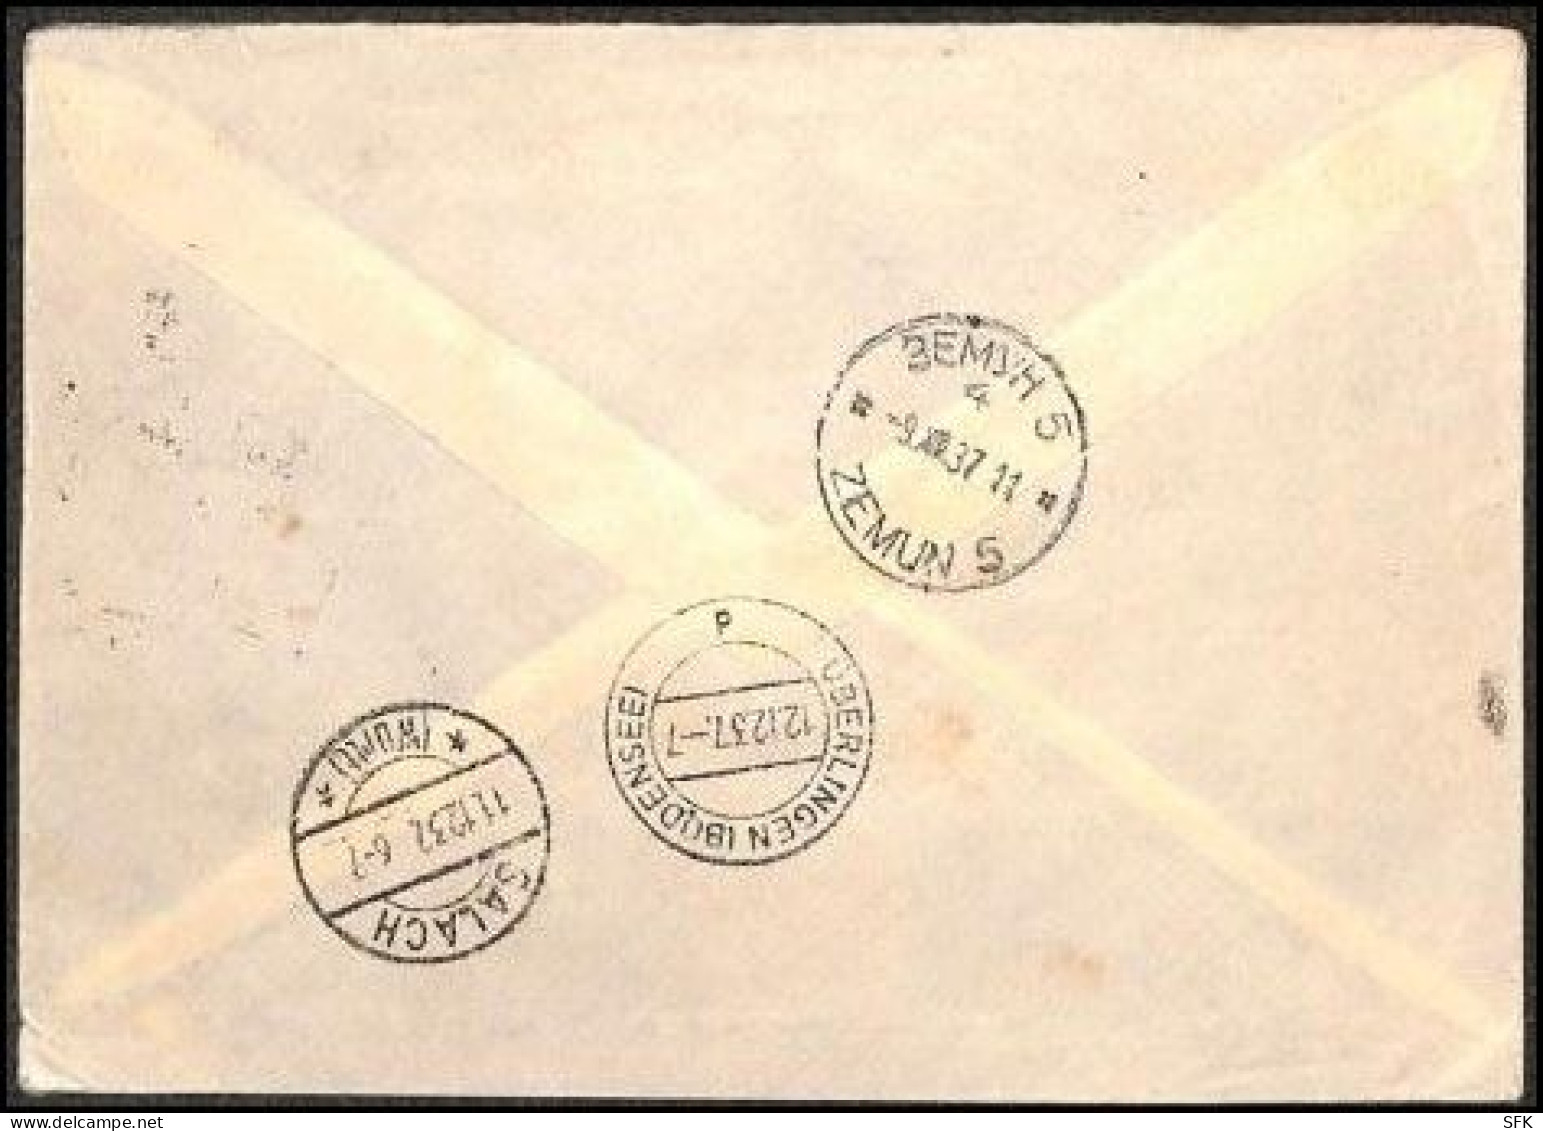 1937 Airmail Letter From Belgrade Airport Zemun 5 To Wirnterberg Sent By Lufthansa With Appropriate Franking, VF - Luftpost